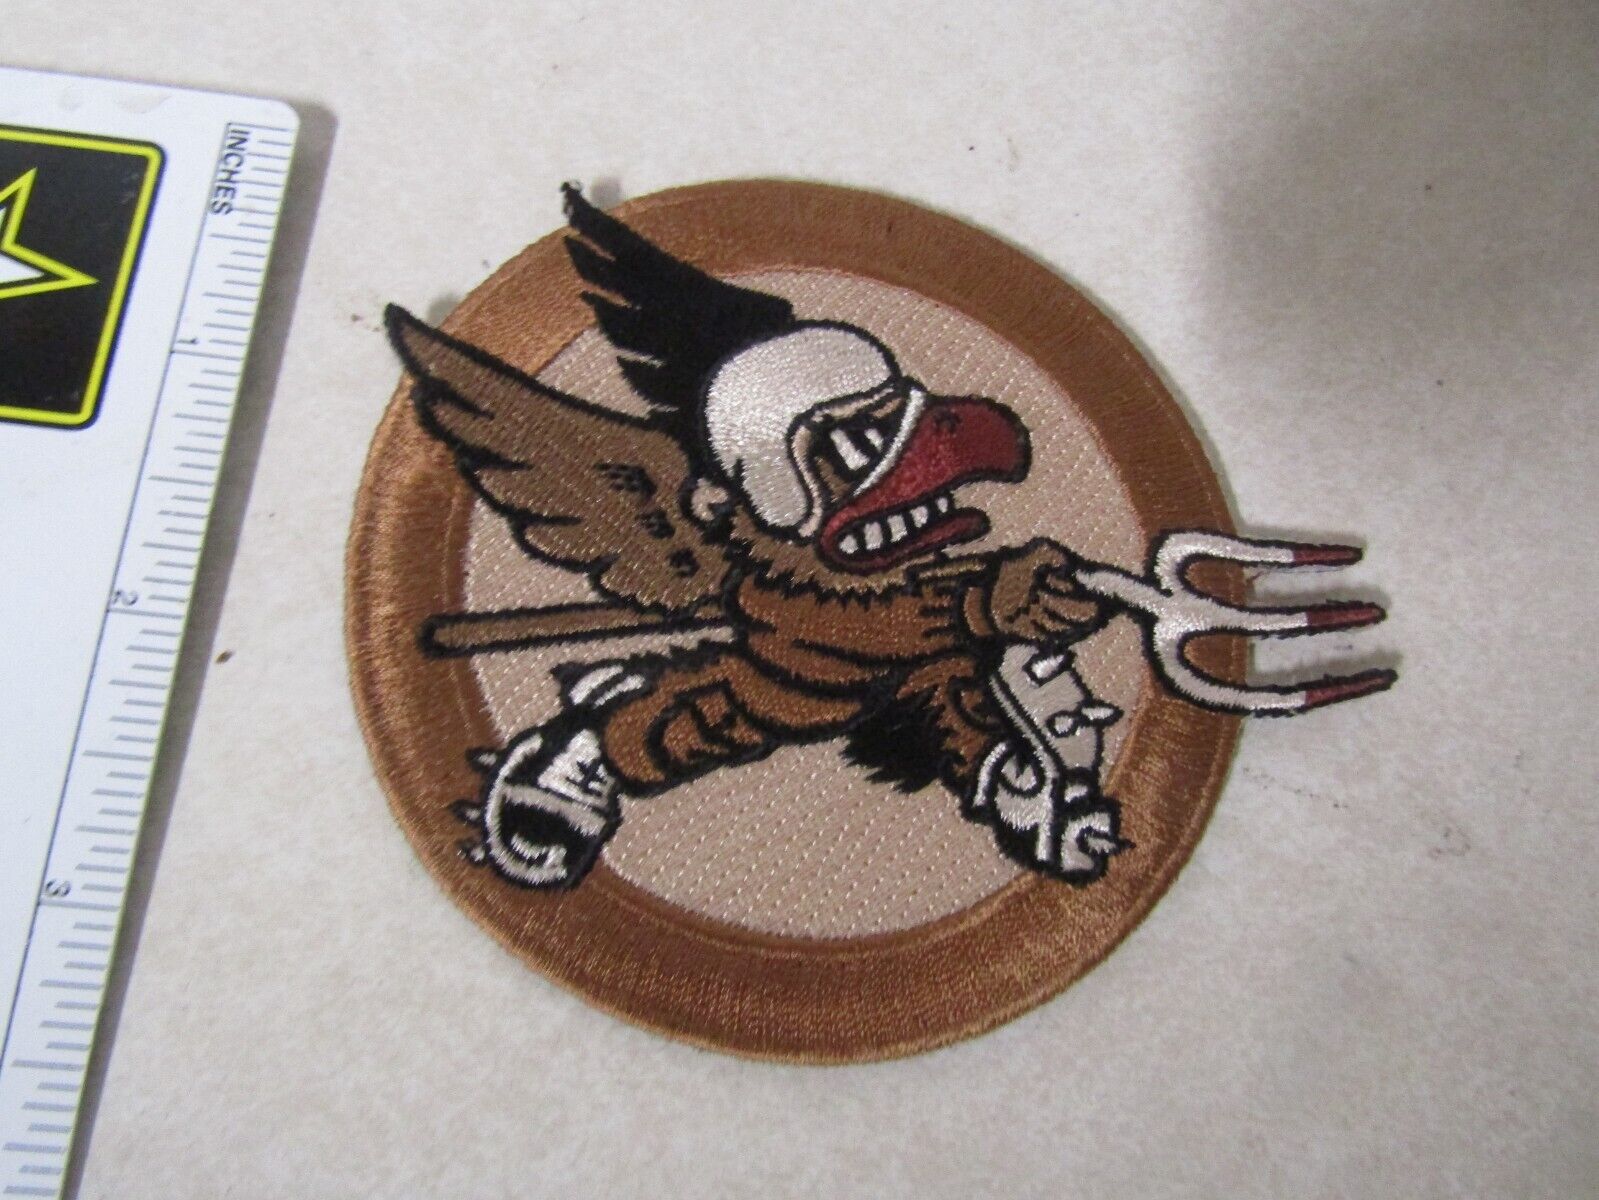 MILITARY PATCH SEW ON OLDER US AIR FORCE 124TH FIGHTER SQUADRON TAN COLORED